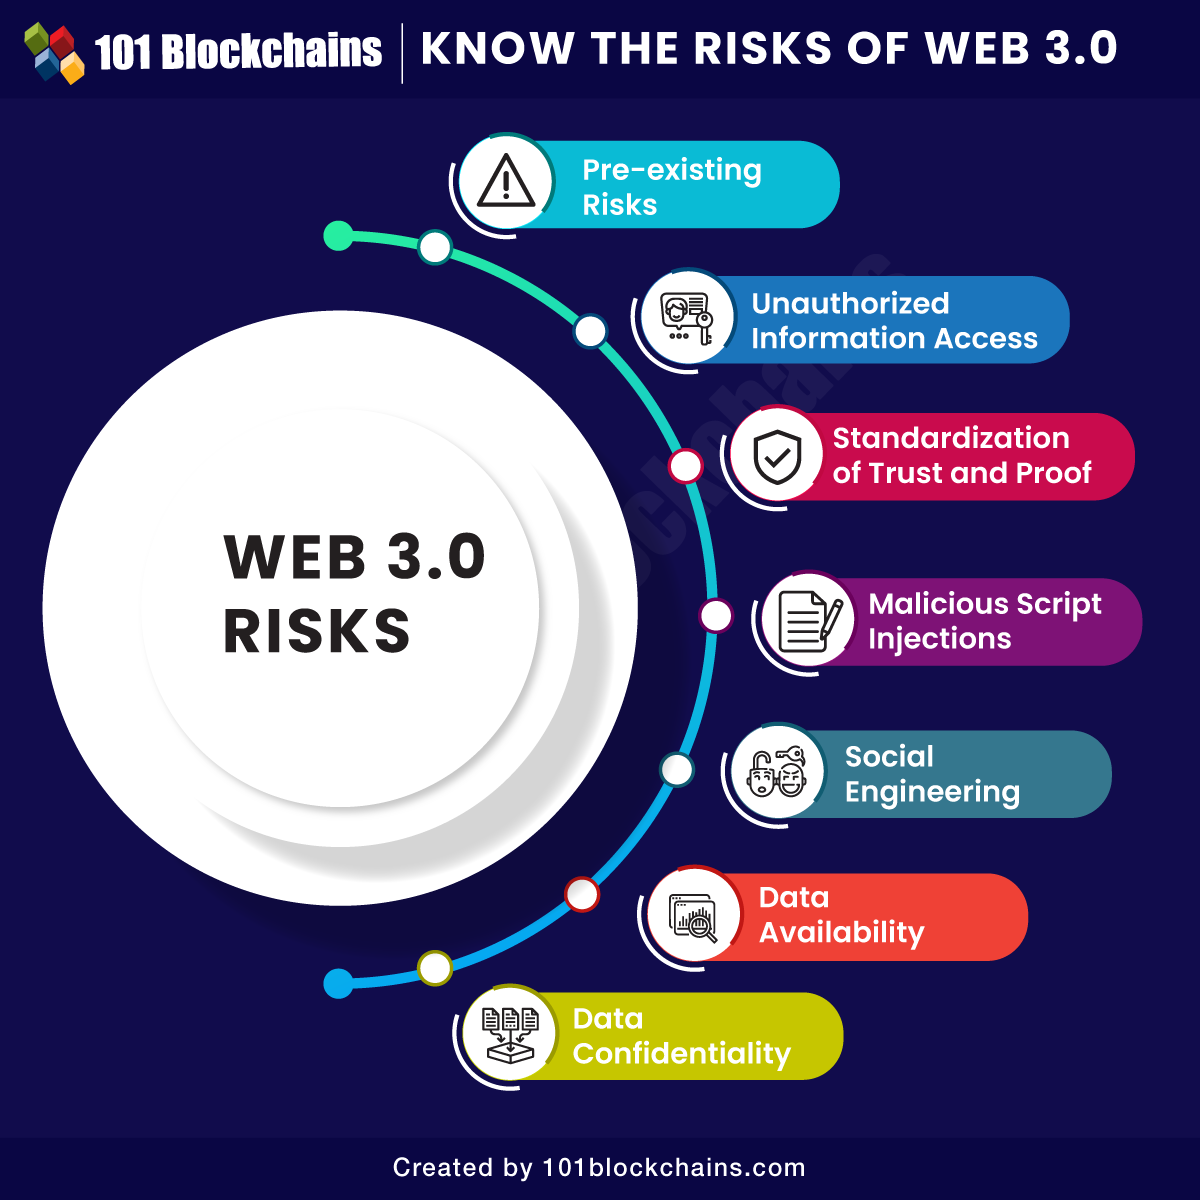 Know the Risks of Web 3.0